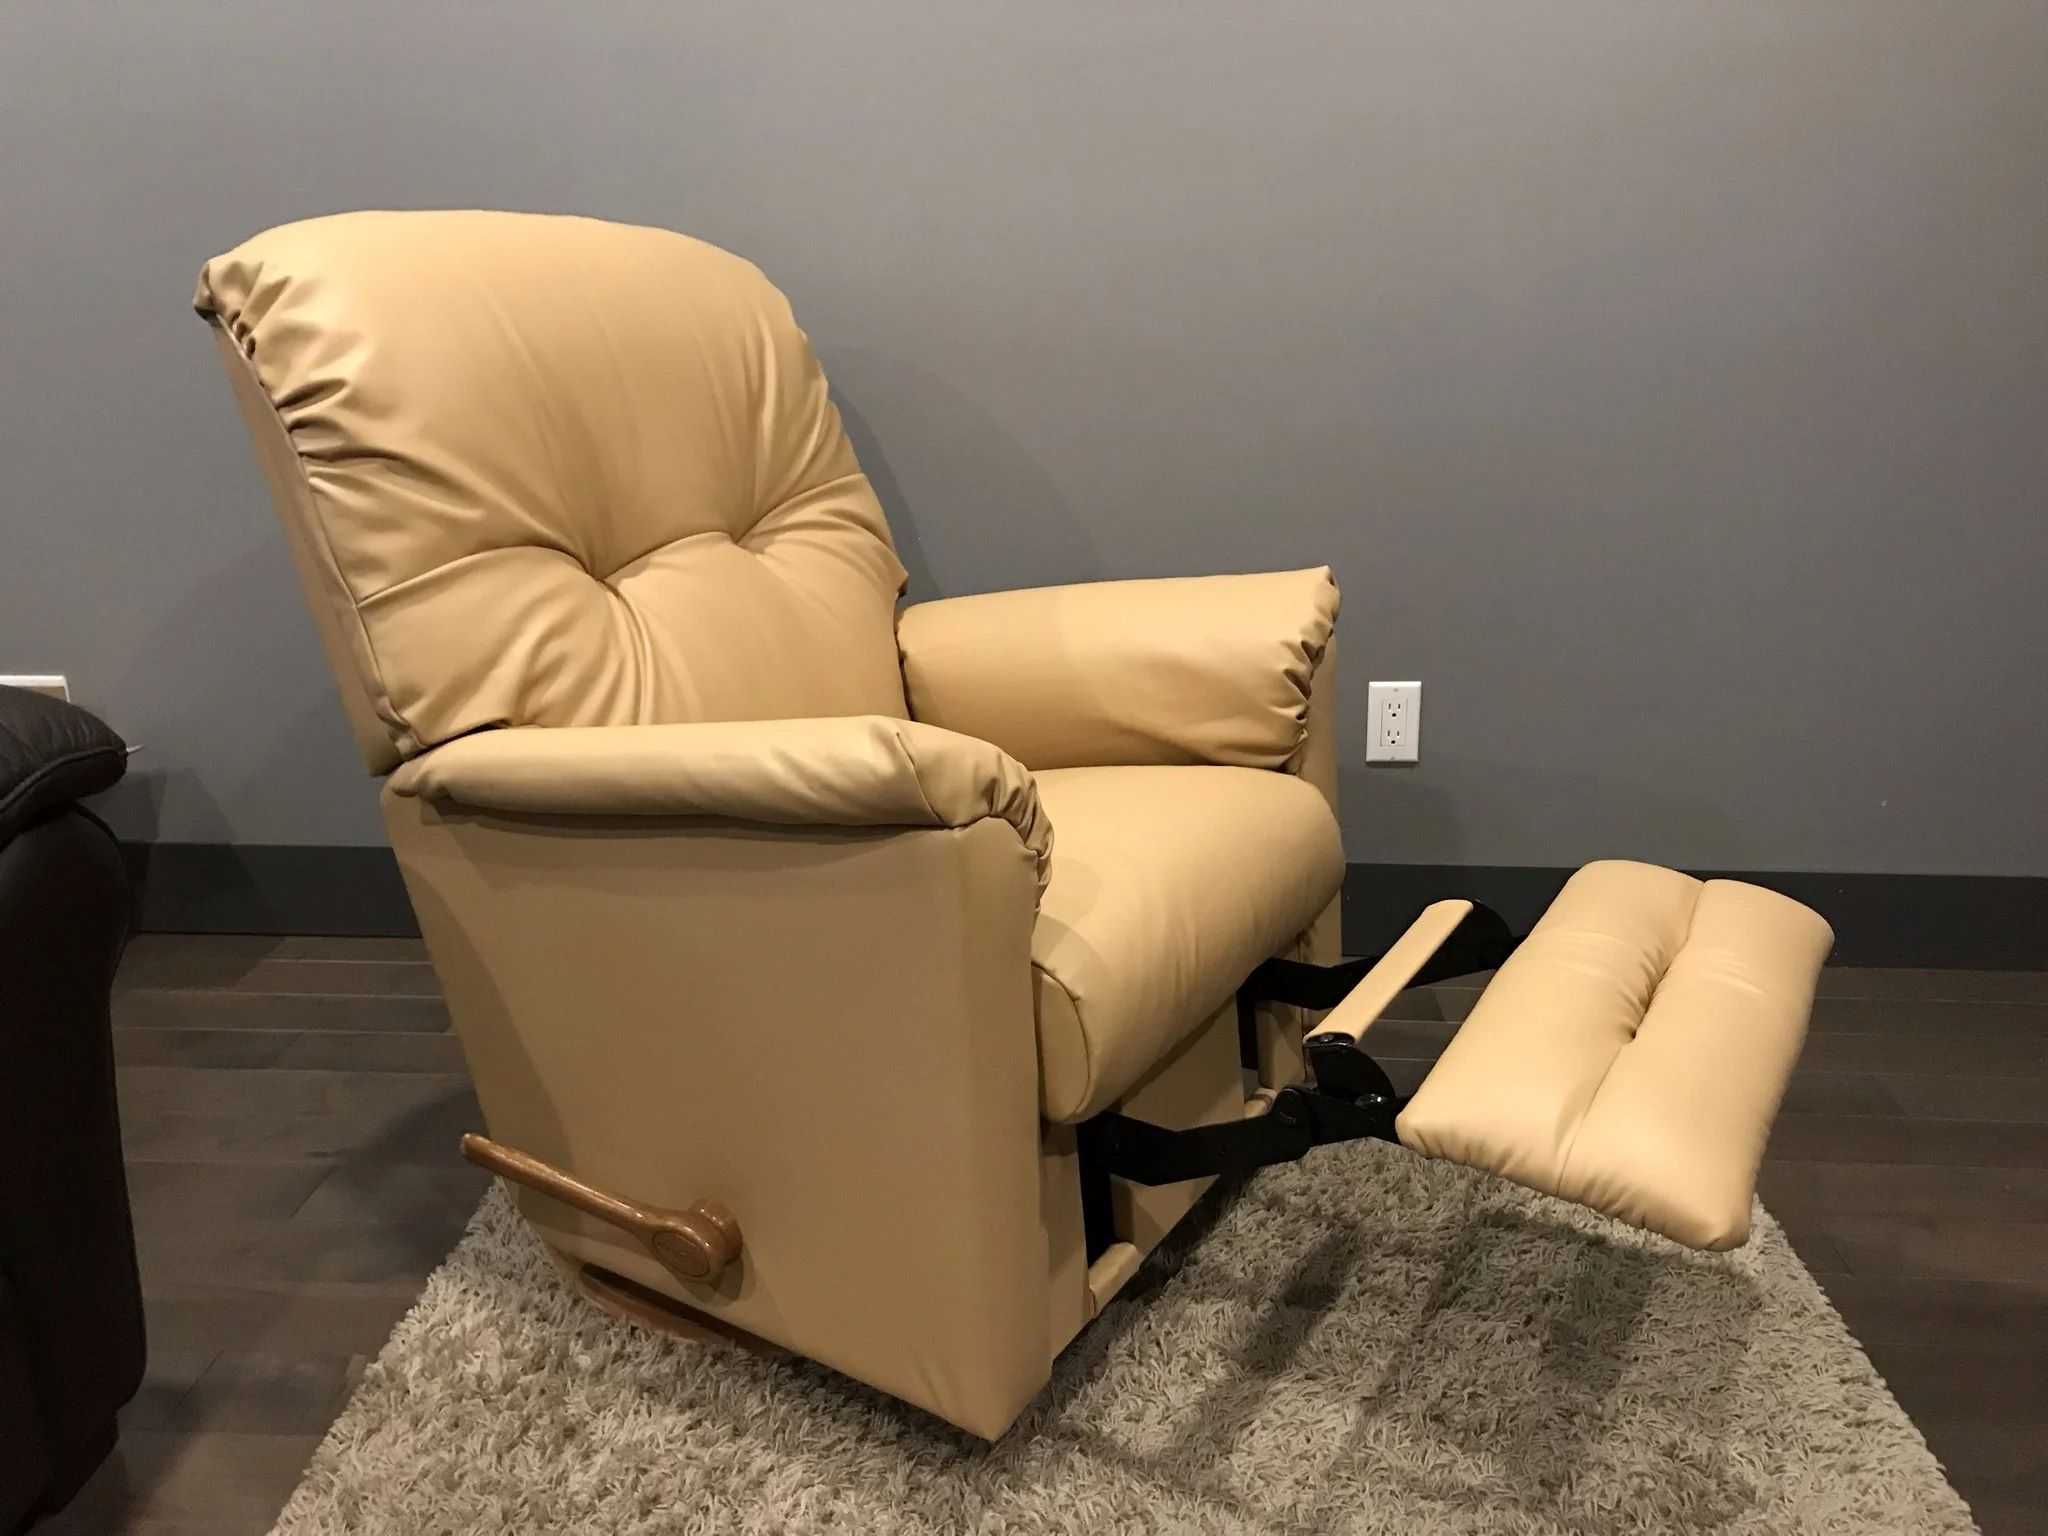 How To Reupholster A Lazyboy Recliner